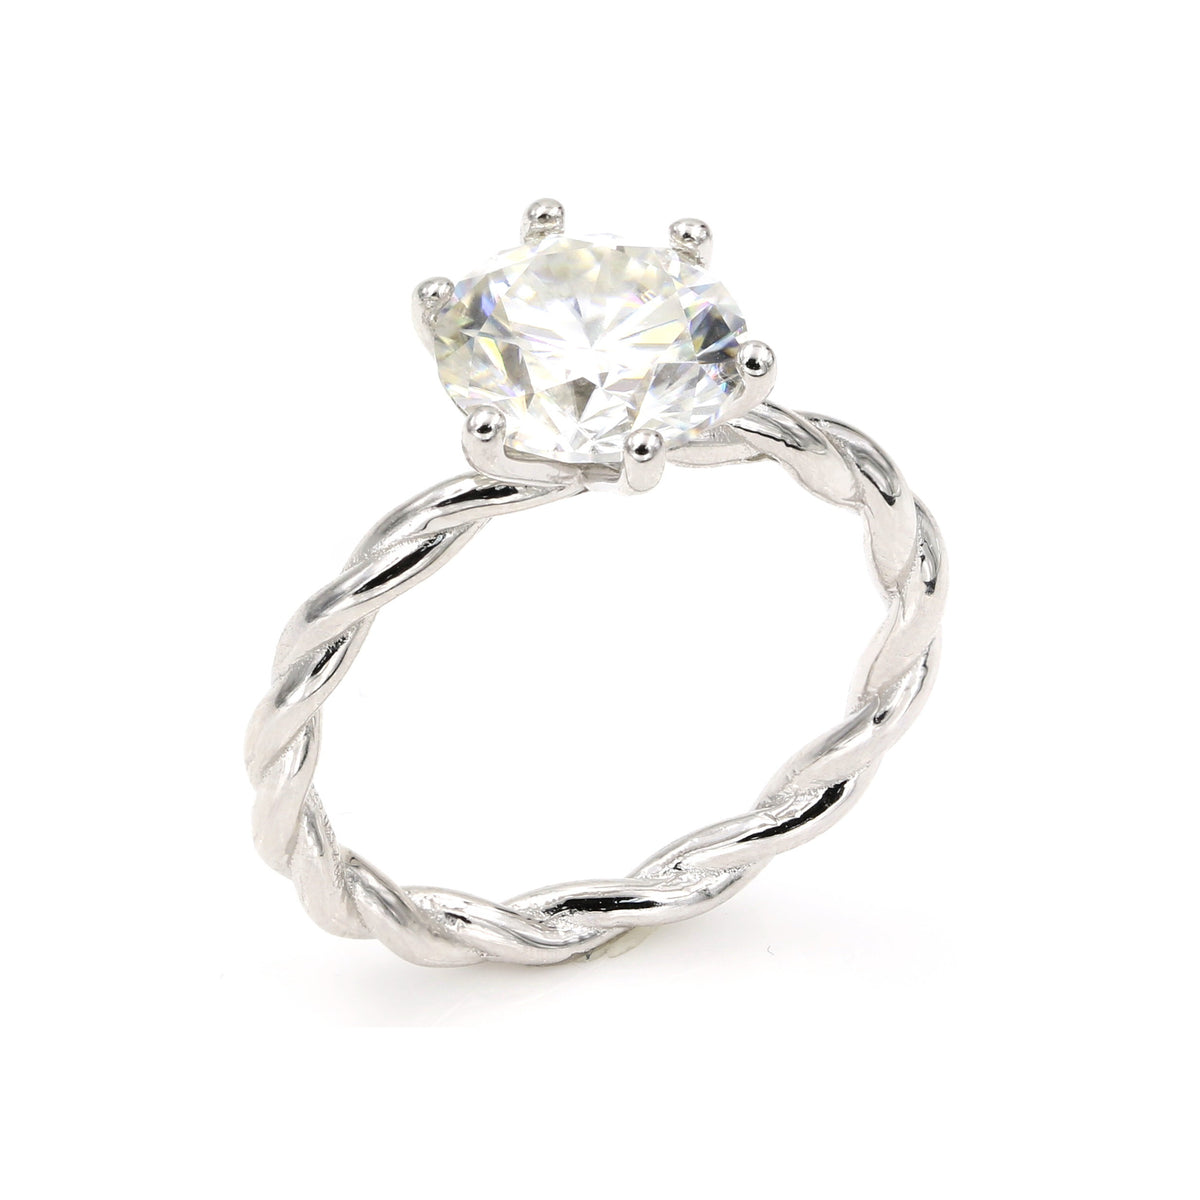 Details about   VVS1 2.50 ct  Diamond 1 Stone Solitaire Engagement Wedding 925 Sterling Silver